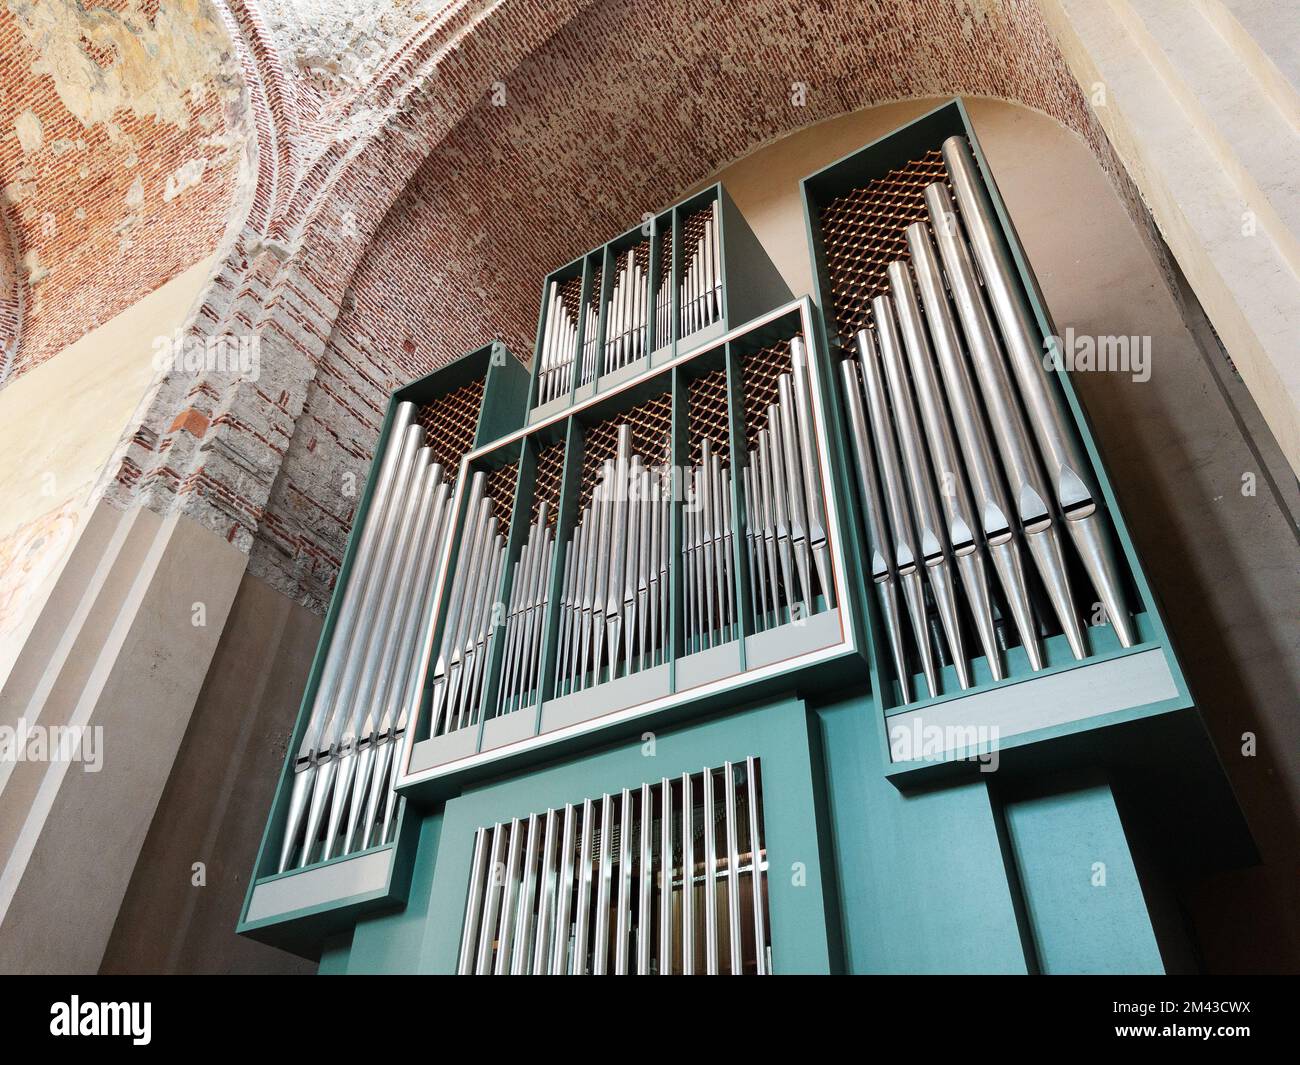 An ancient musical instrument, a blue-colored organ in a church with a construction of vertical pipes Stock Photo